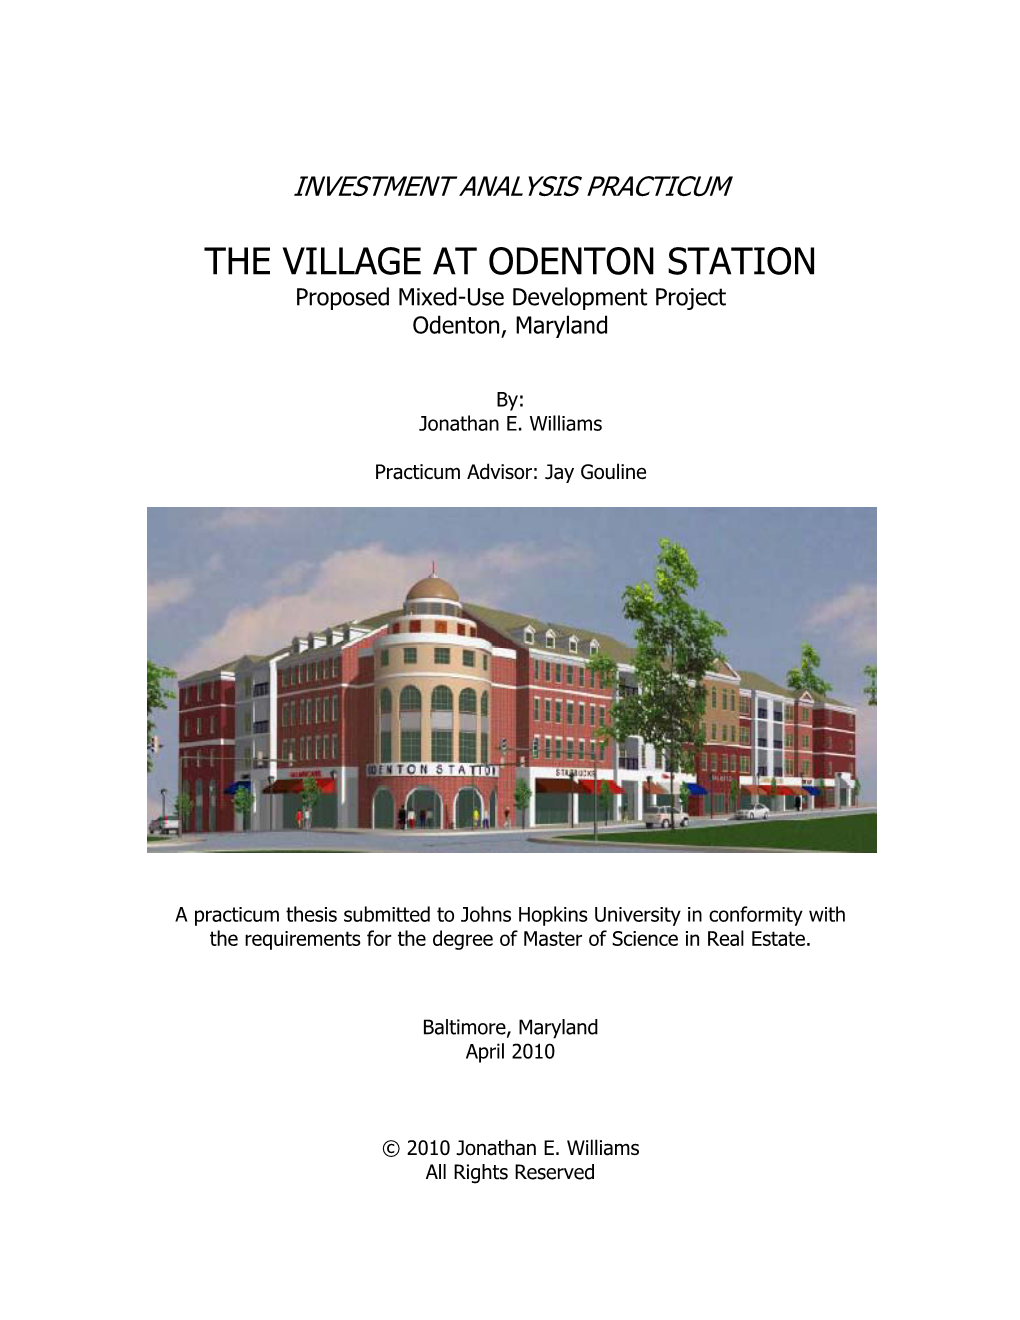 THE VILLAGE at ODENTON STATION Proposed Mixed-Use Development Project Odenton, Maryland